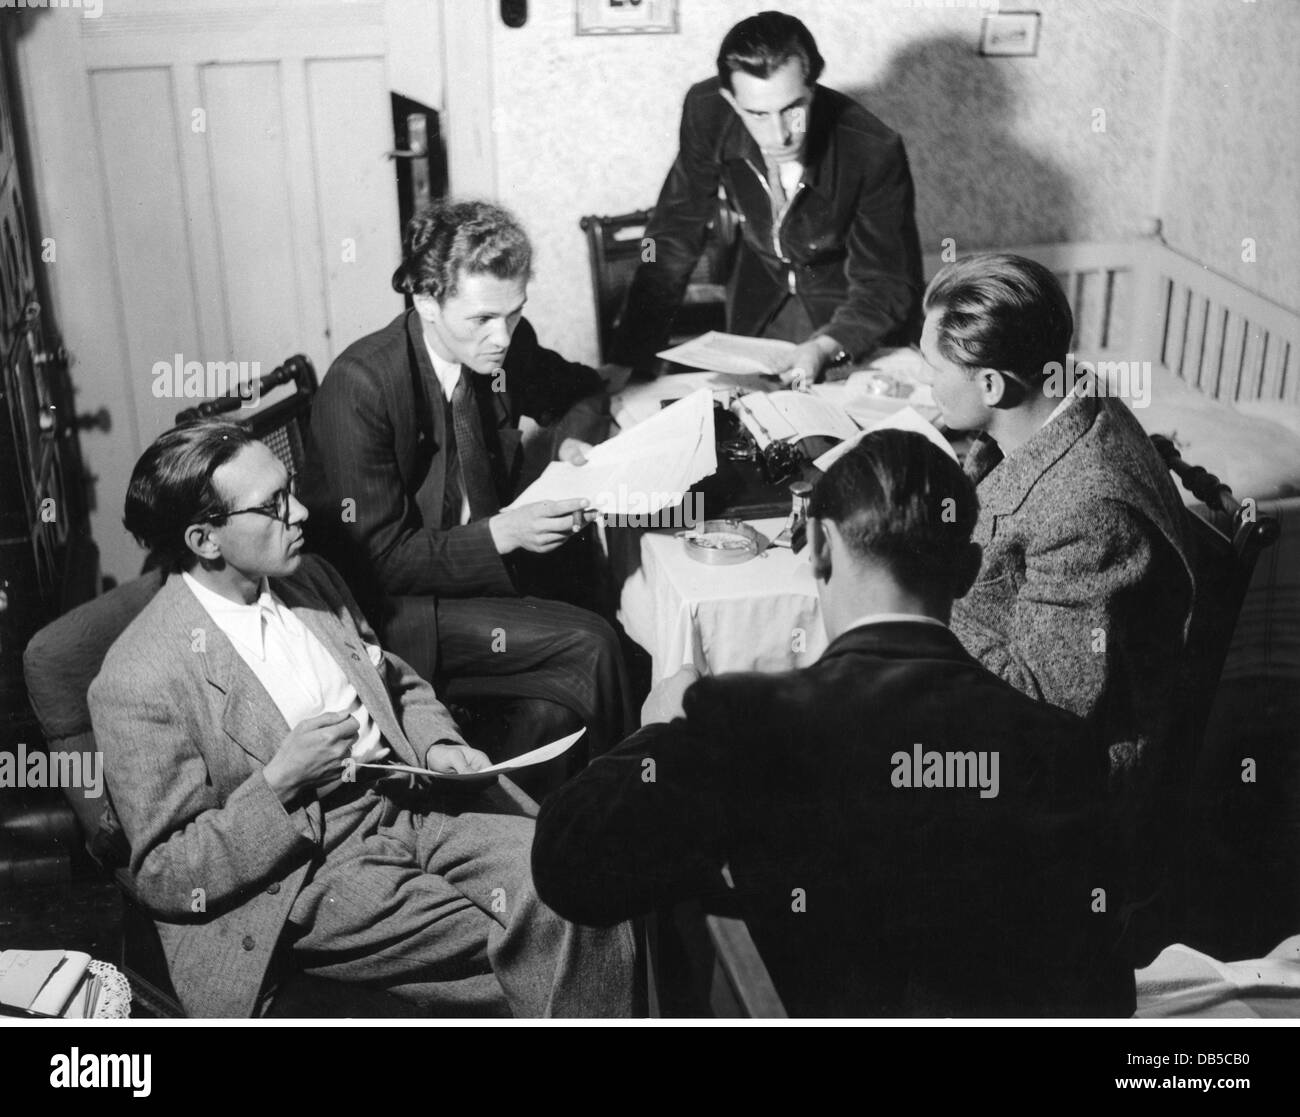 geography / travel, Germany, politics, 1950s, Bund der Kriegsdienstverweigerer (League of Conscientious Objectors), leading members during a meeting, 1951, Additional-Rights-Clearences-Not Available Stock Photo